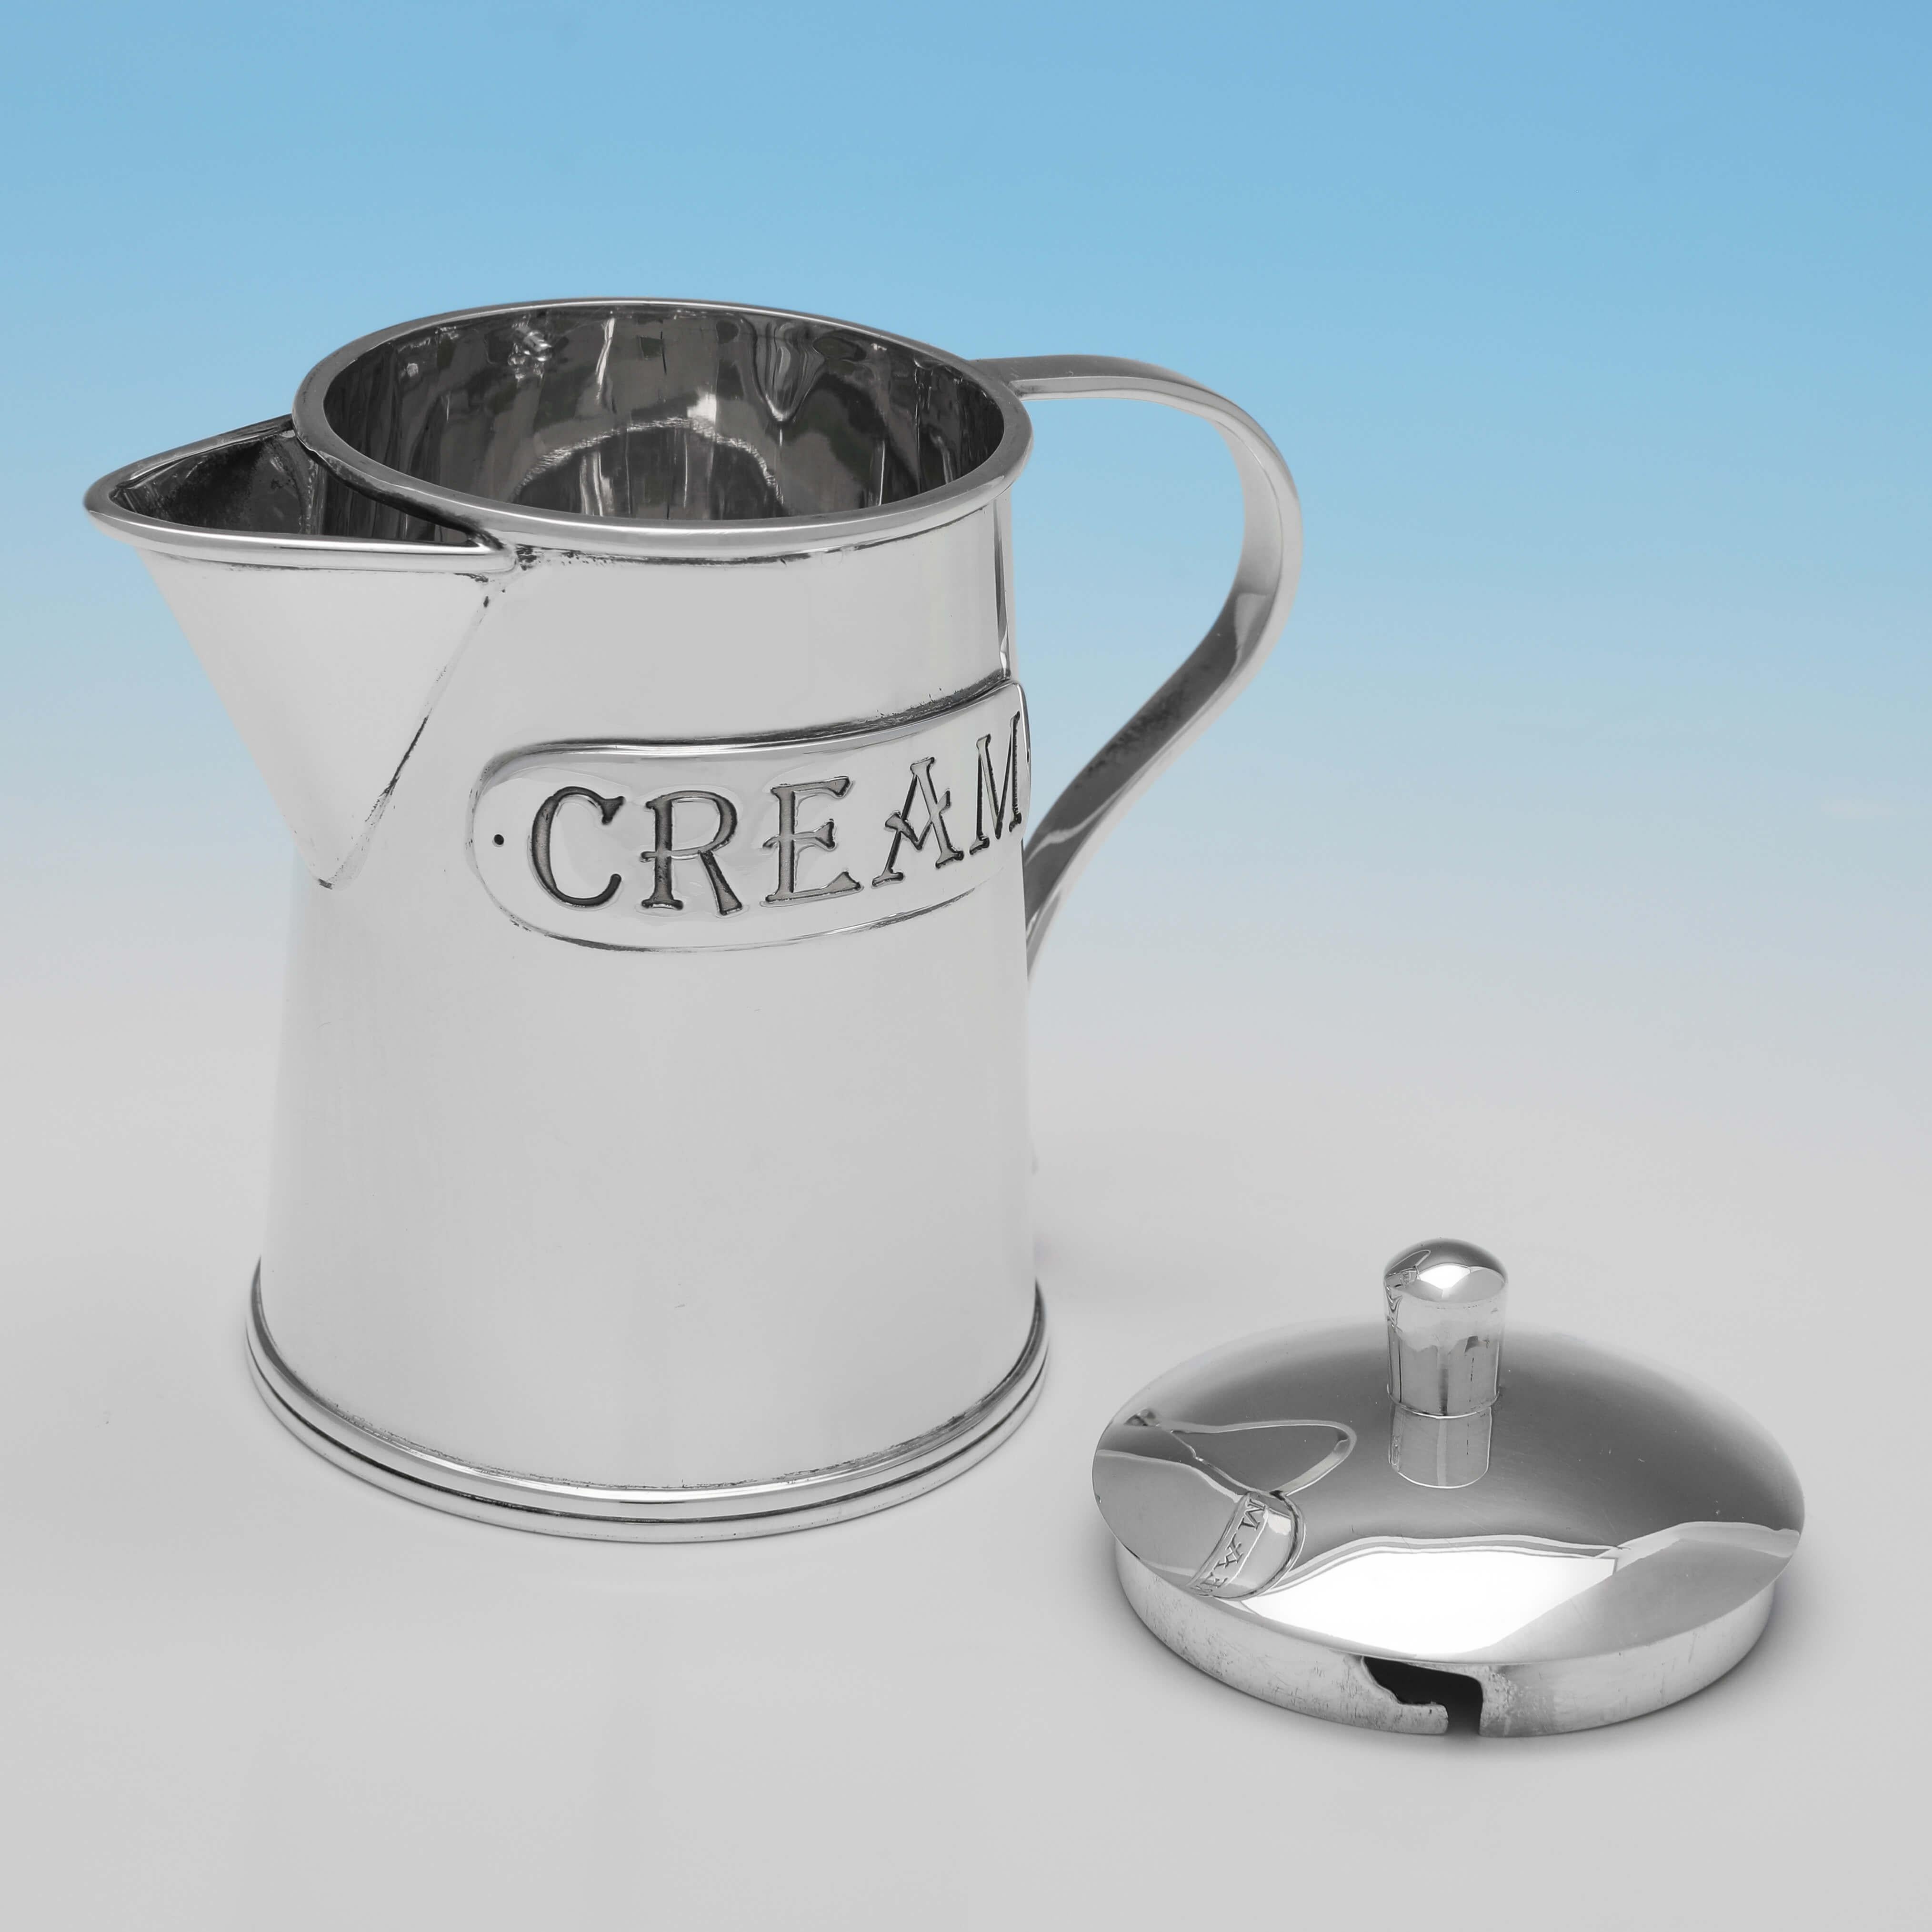 Novelty Sterling Silver Sugar & Cream Set, Thistle & Bee, Birmingham, 2000 In Good Condition For Sale In London, London